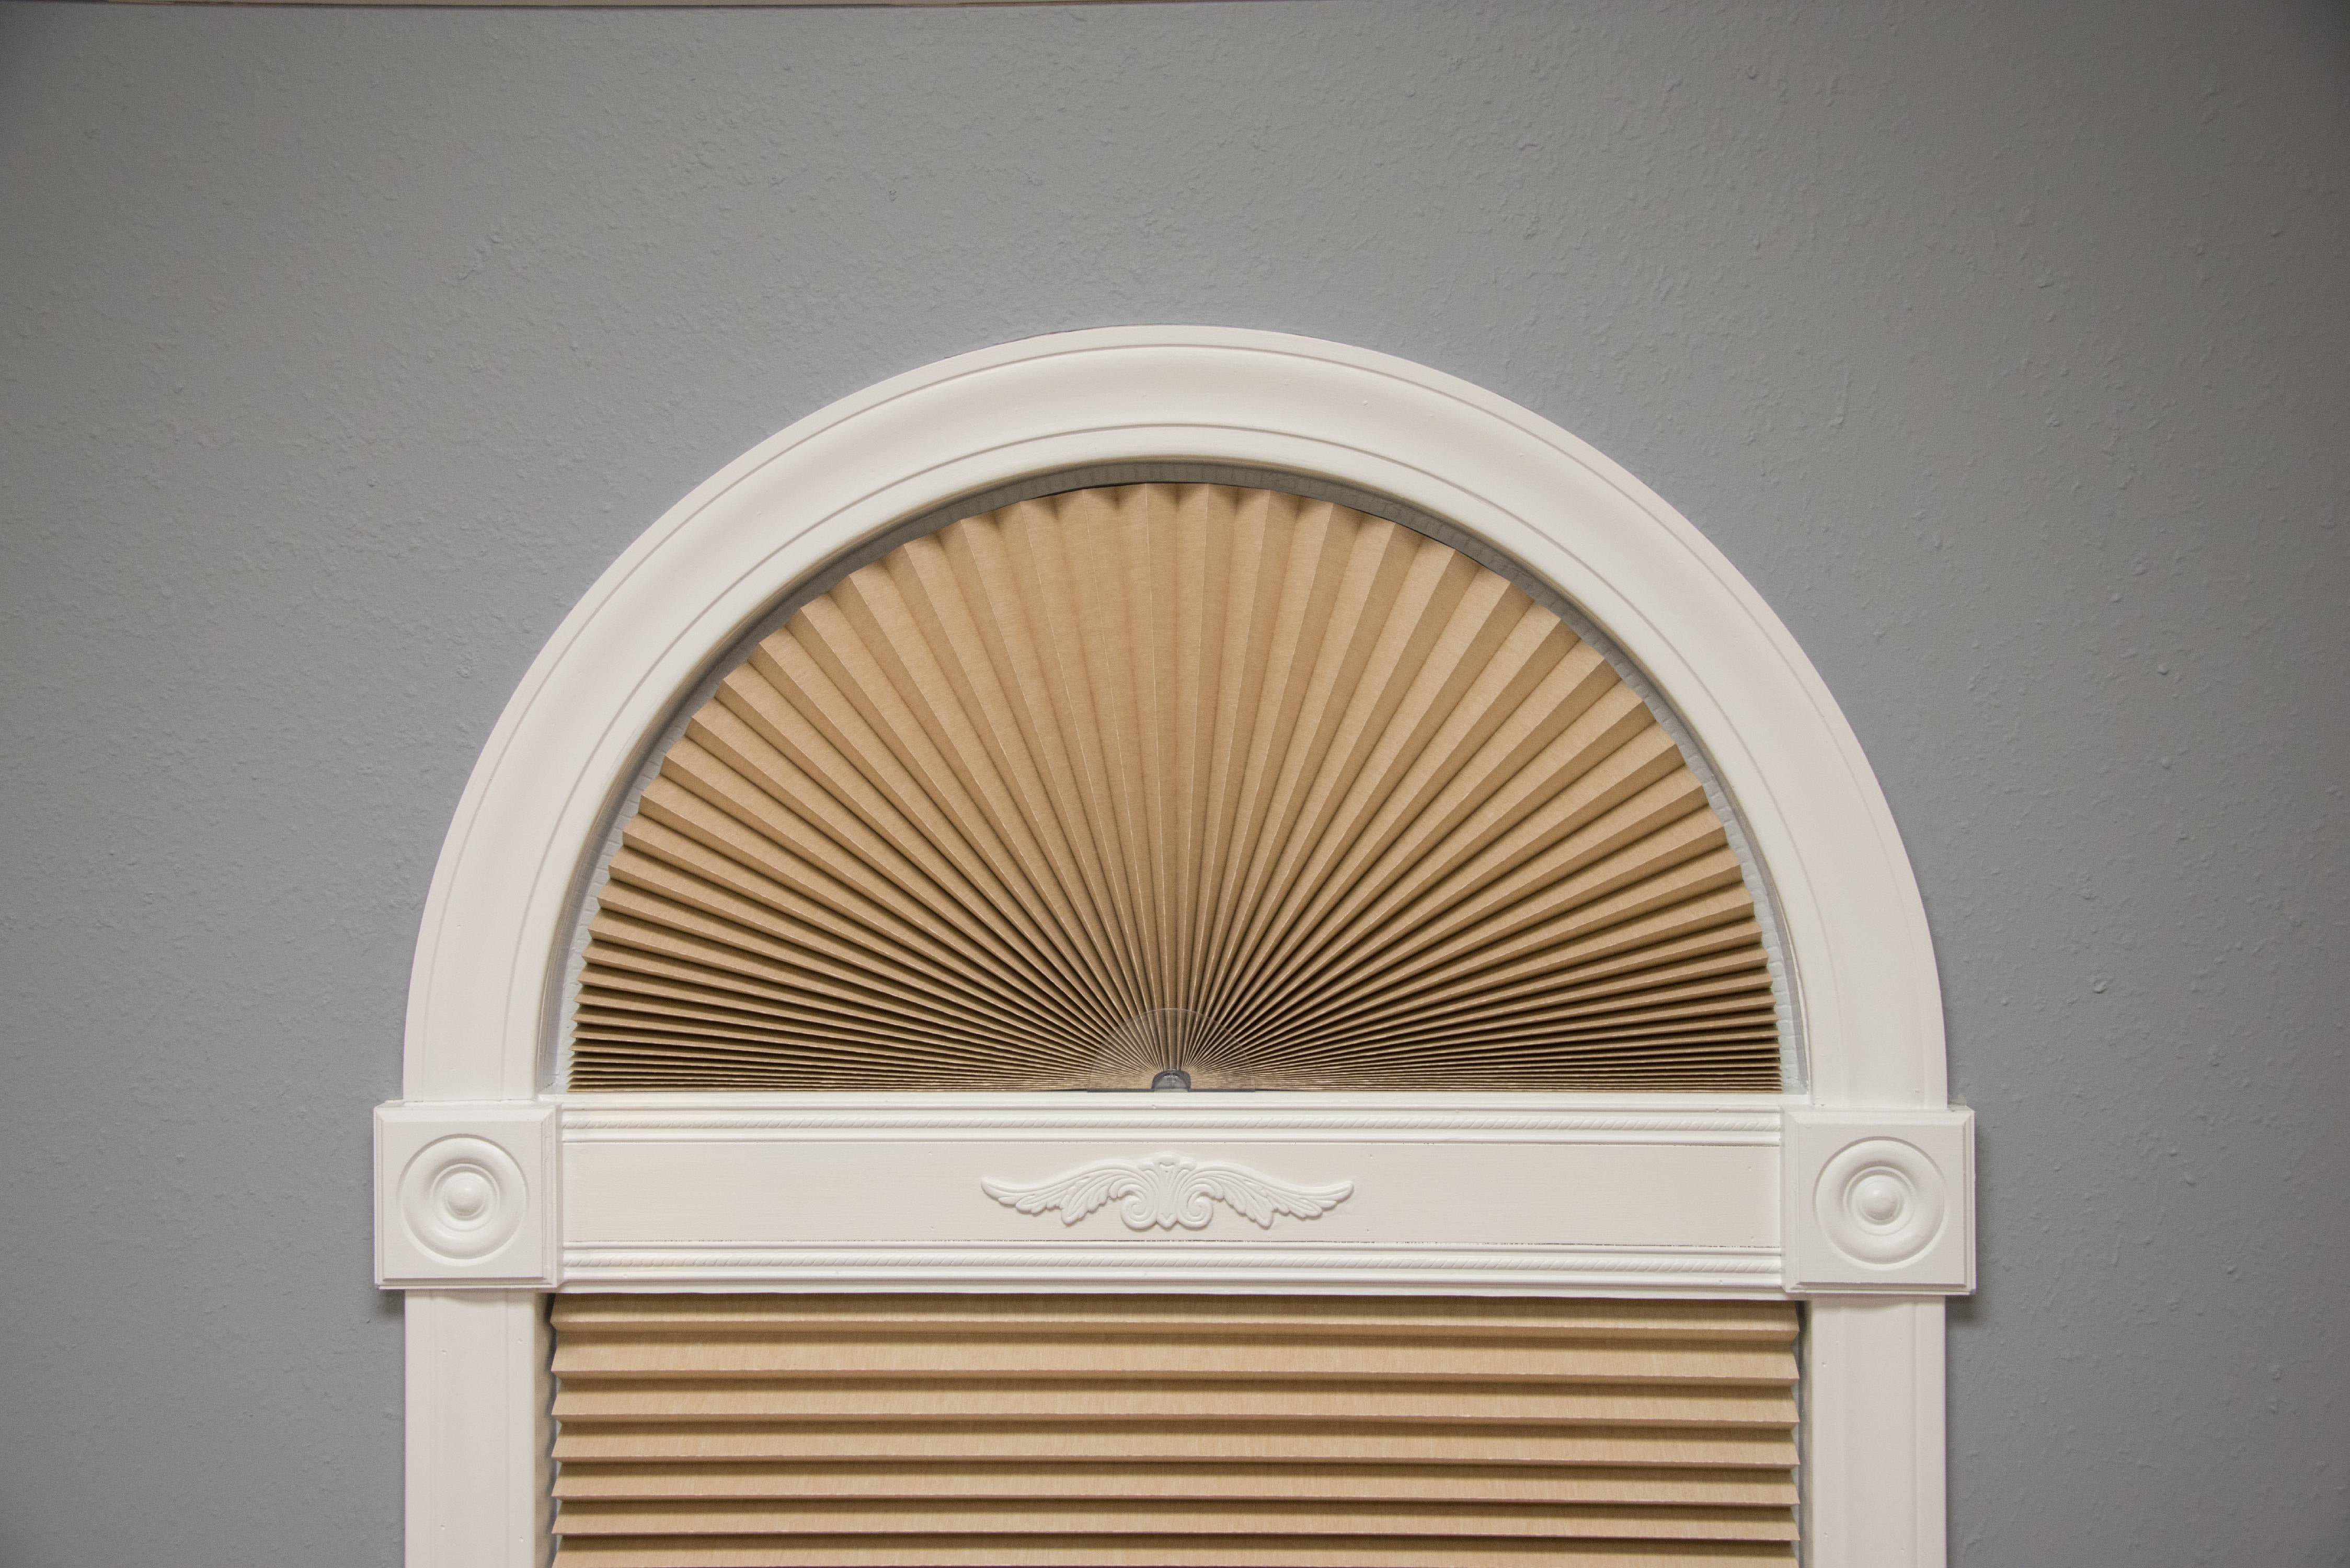 Brown Arch Window Shades Half Circle Window Shades Pleated Blinds Easy Install White Arch Pleated Blinds Filtering Light Fit Prefect for Half Moon Arch Windows 36-72 